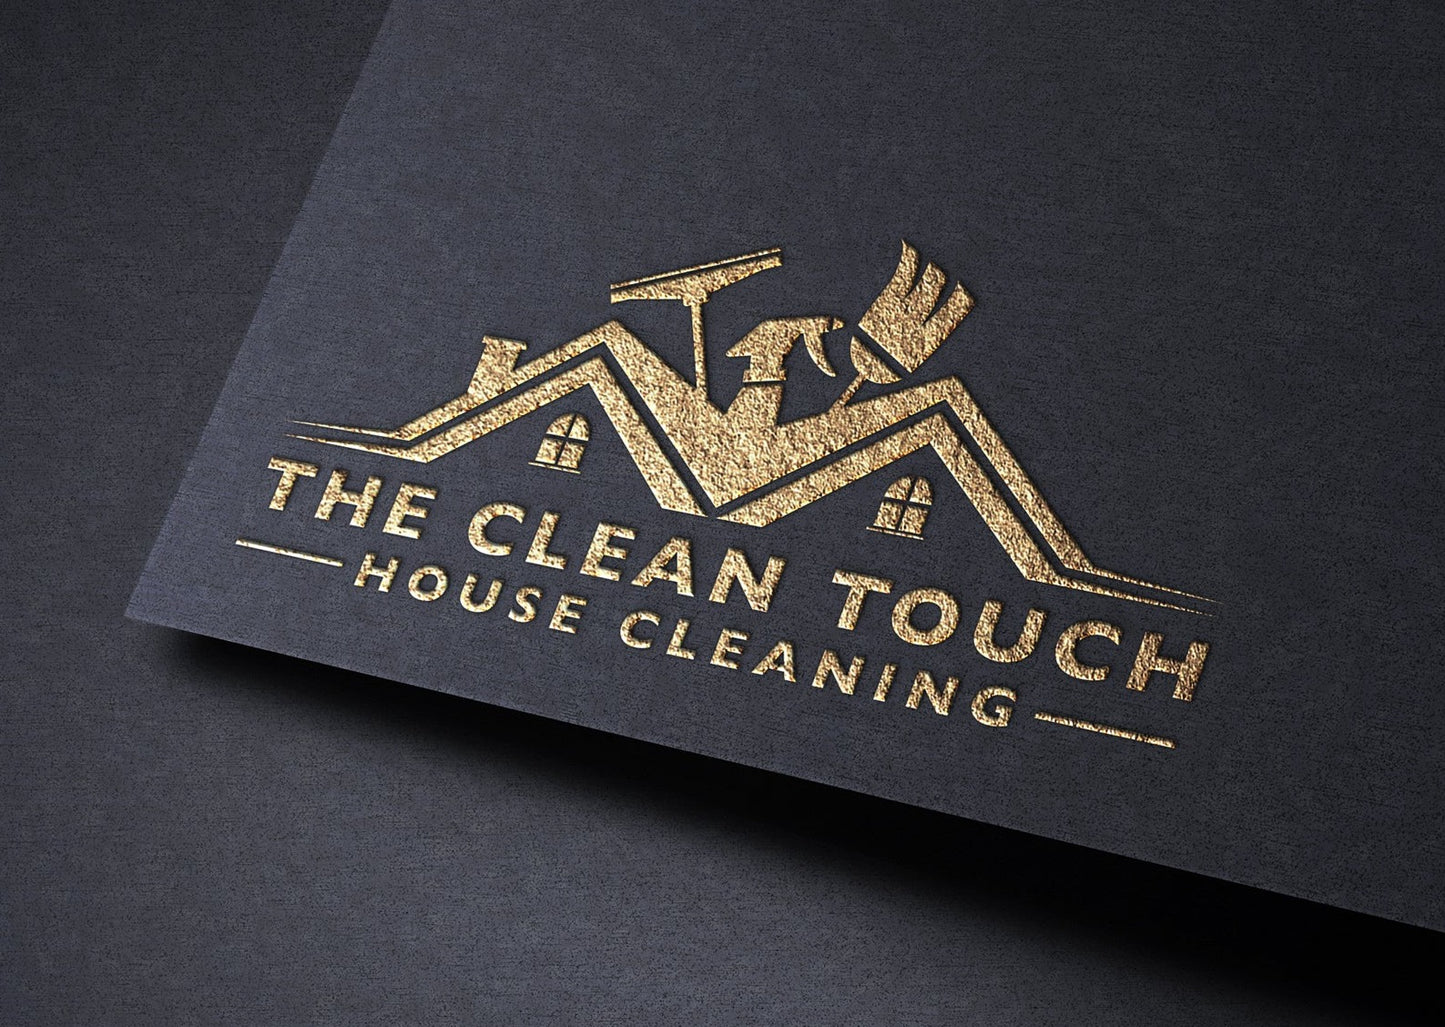 Logo Design - Cleaning Services | Housekeeping Logo | Cleaning Business Design